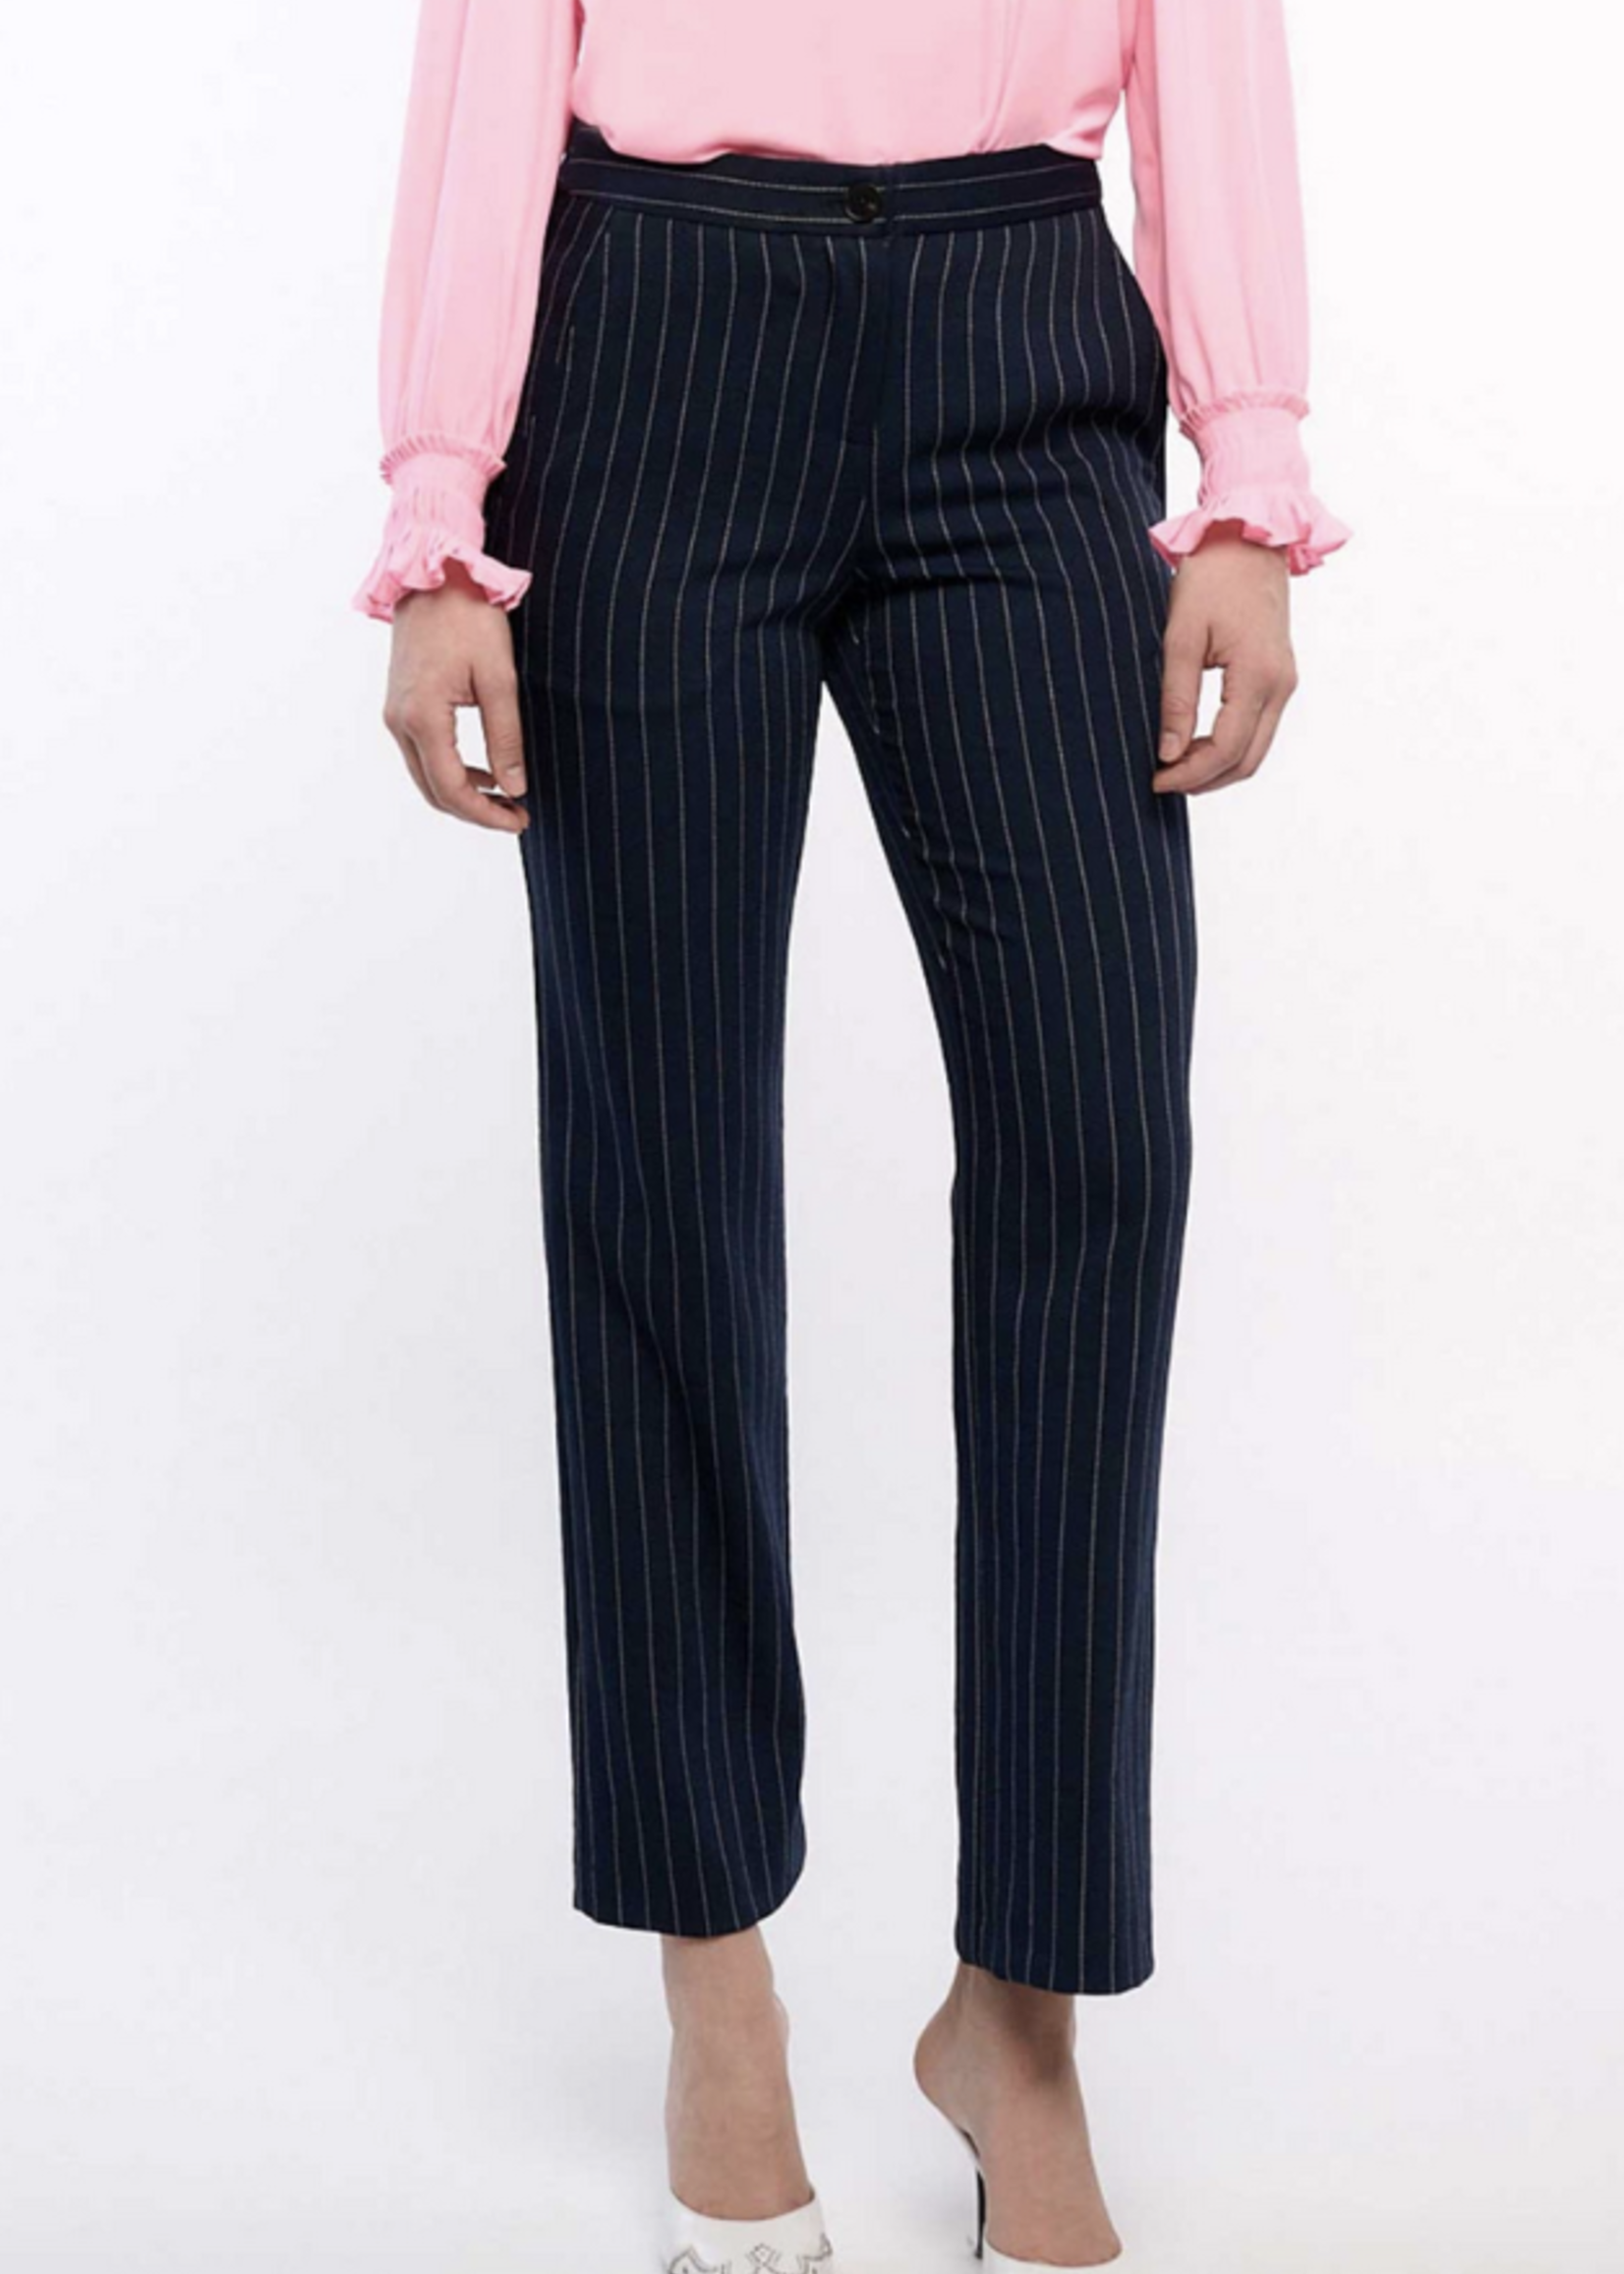 CURRENT AIR PINSTRIPED BOOTCUT PANTS